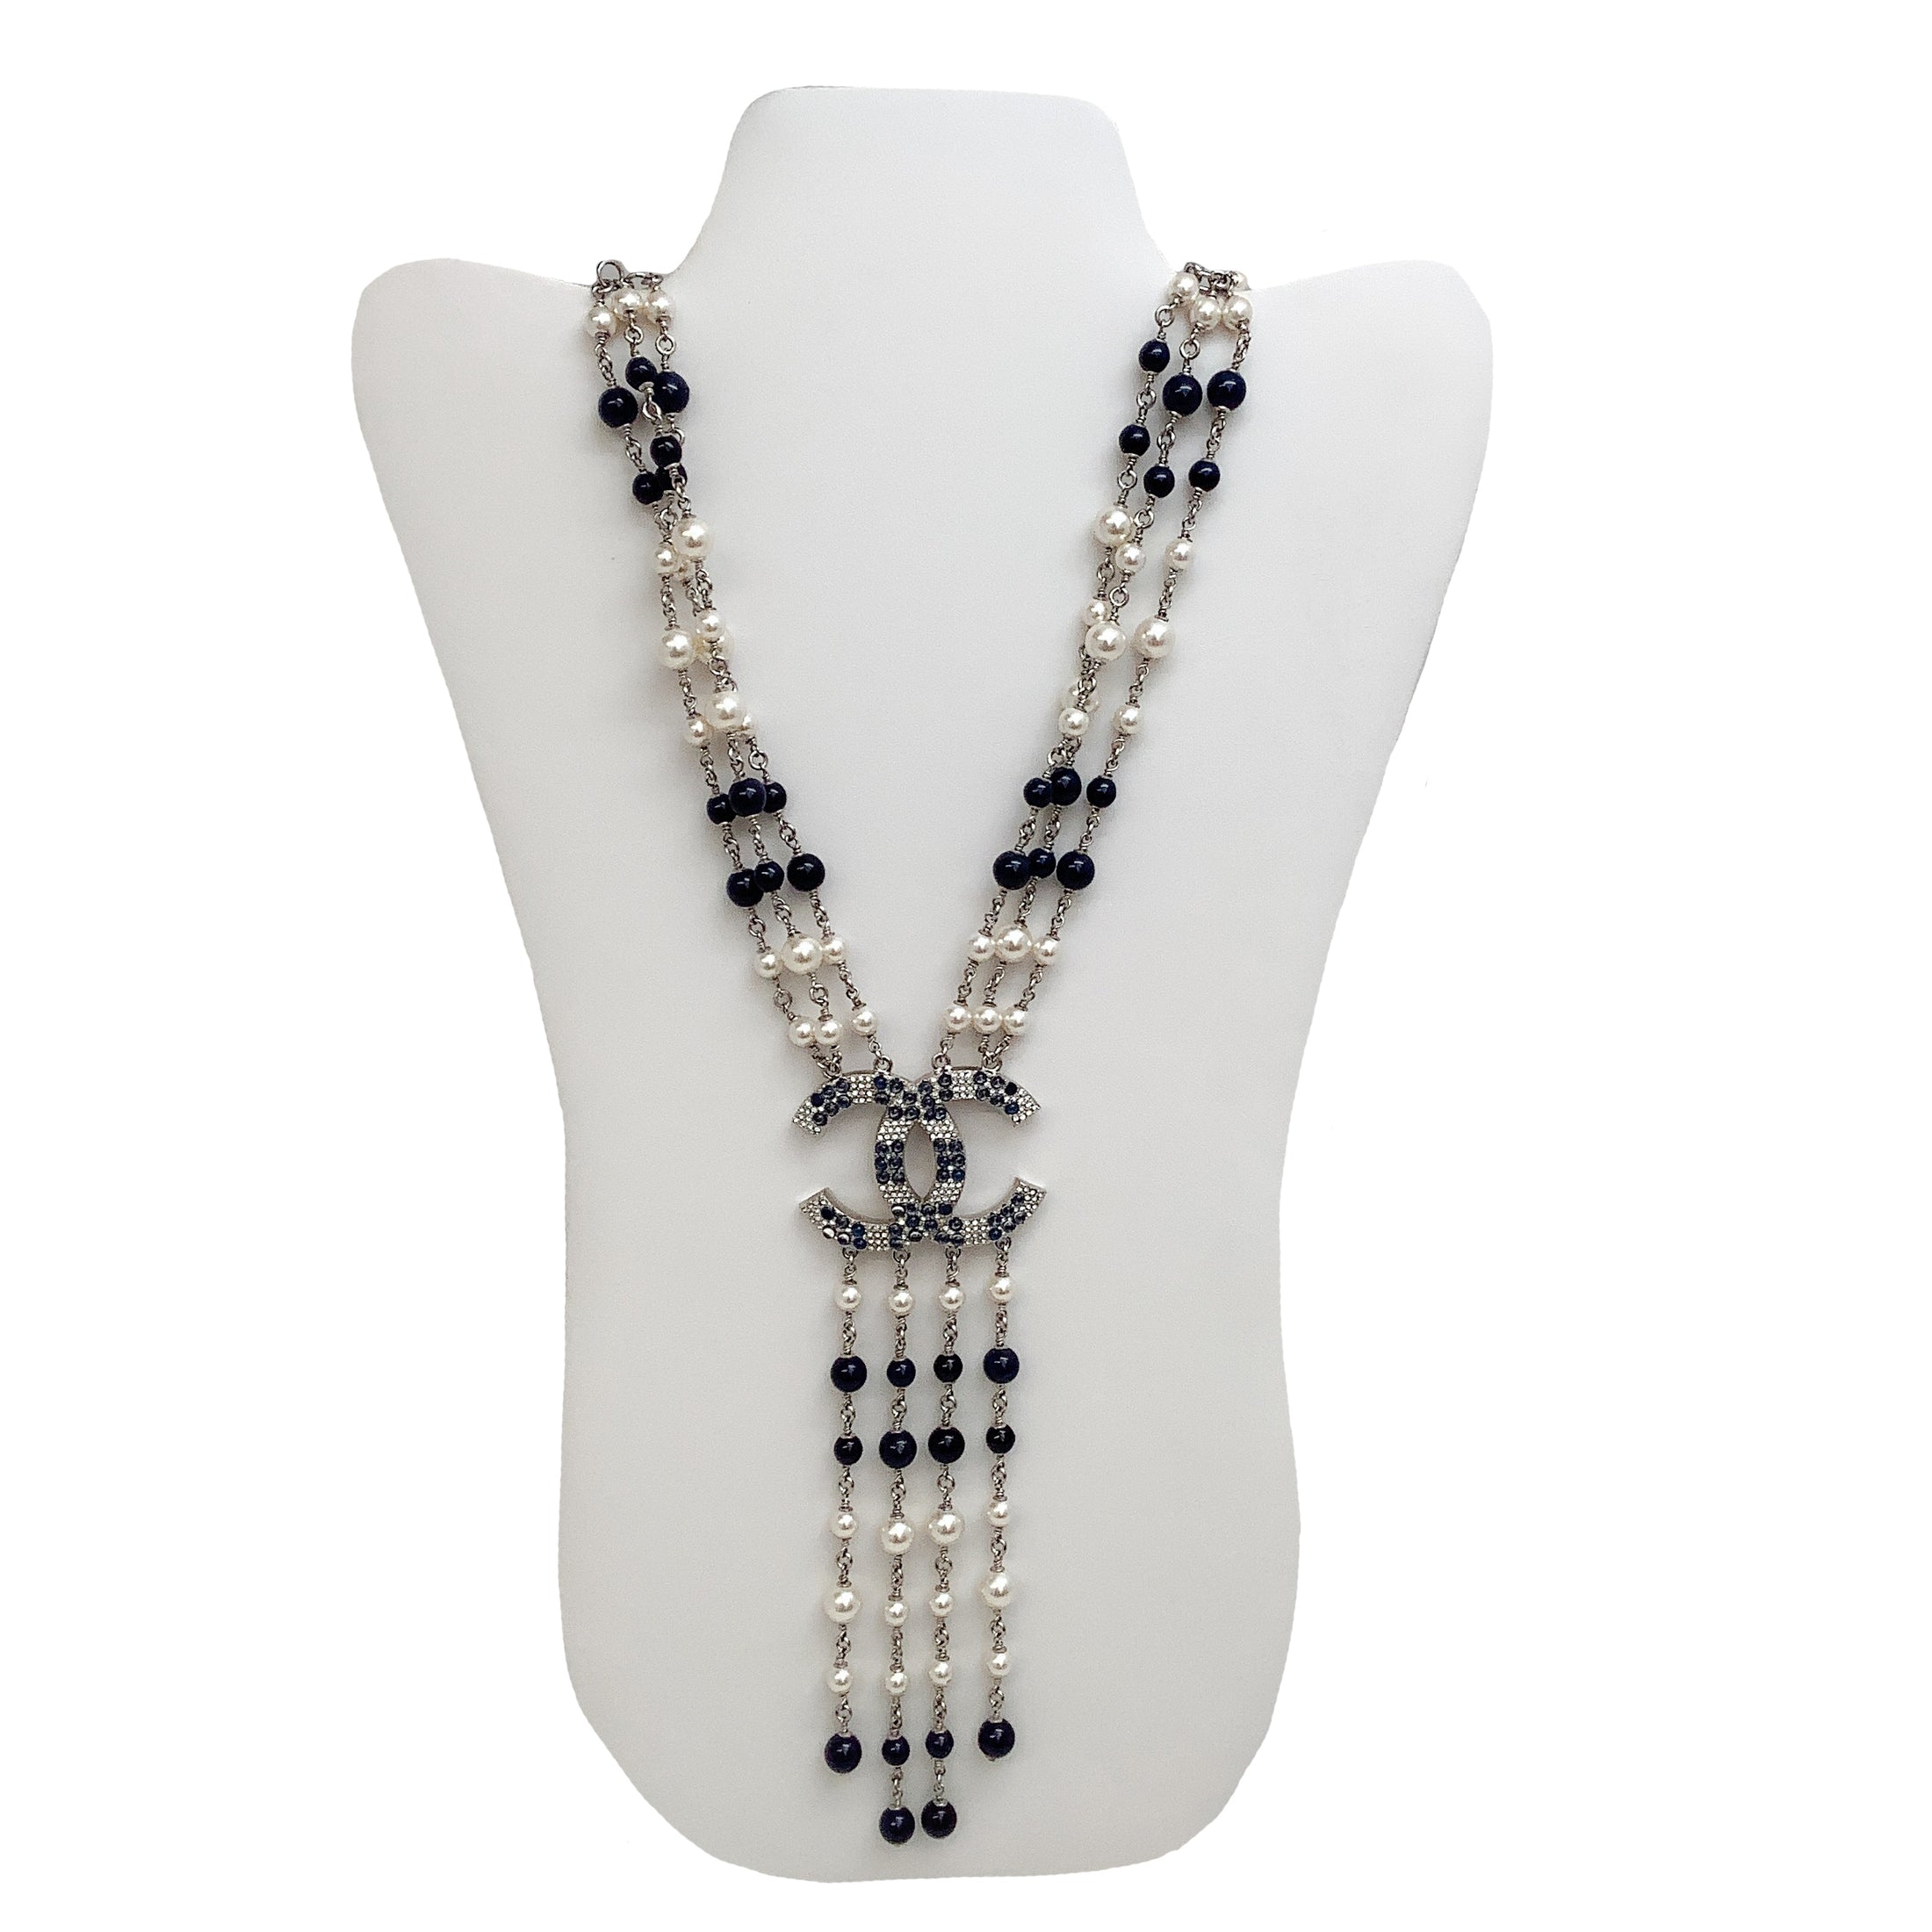 Chanel Pearl And Navy Crystals 2019 Necklace